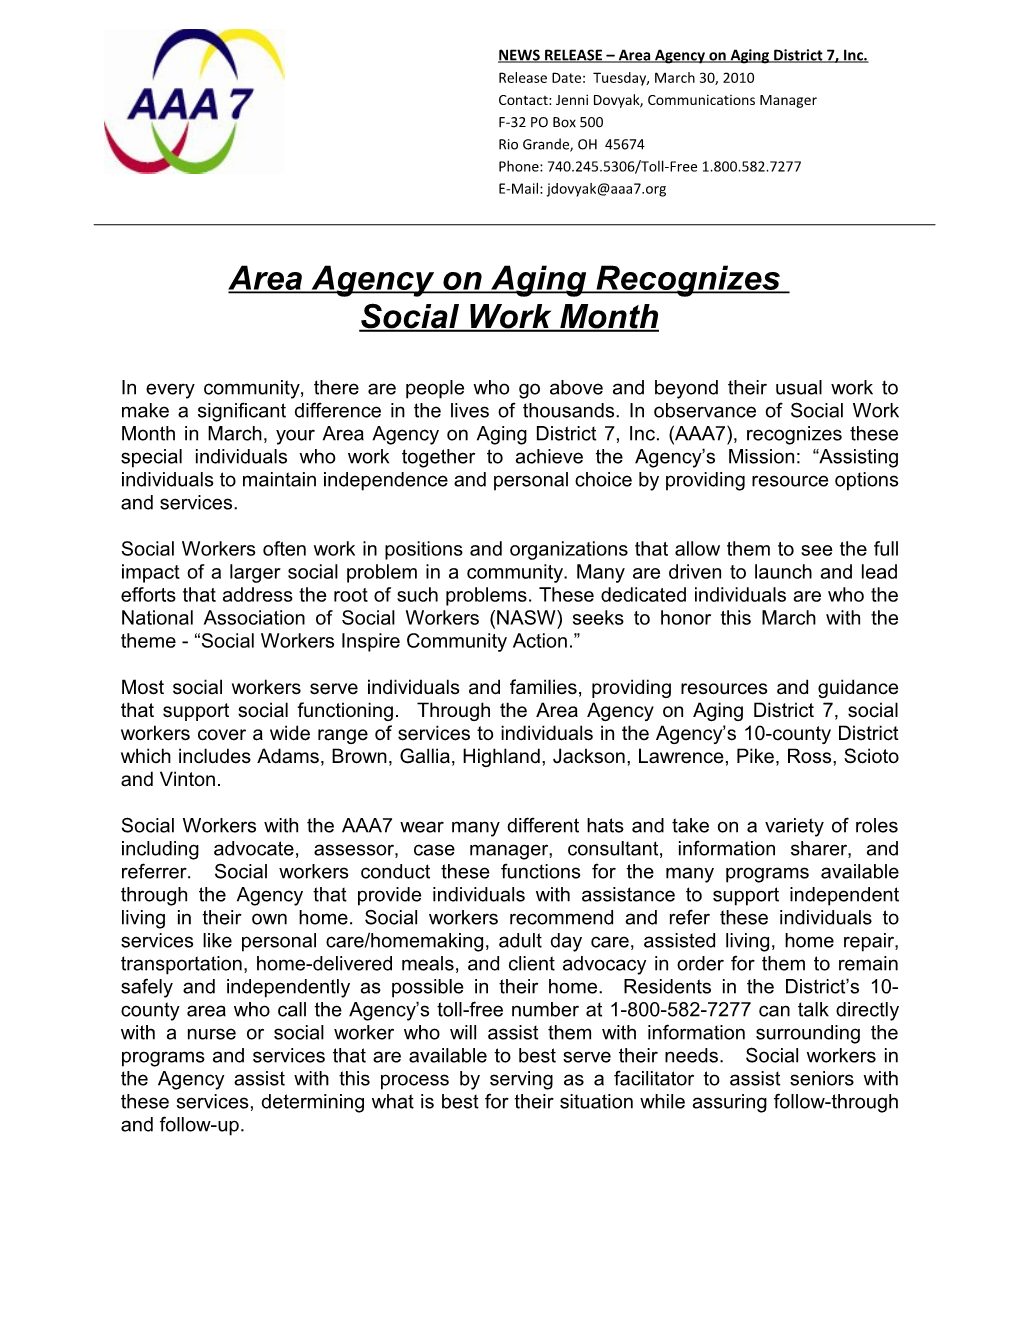 Area Agency on Aging Recognizes